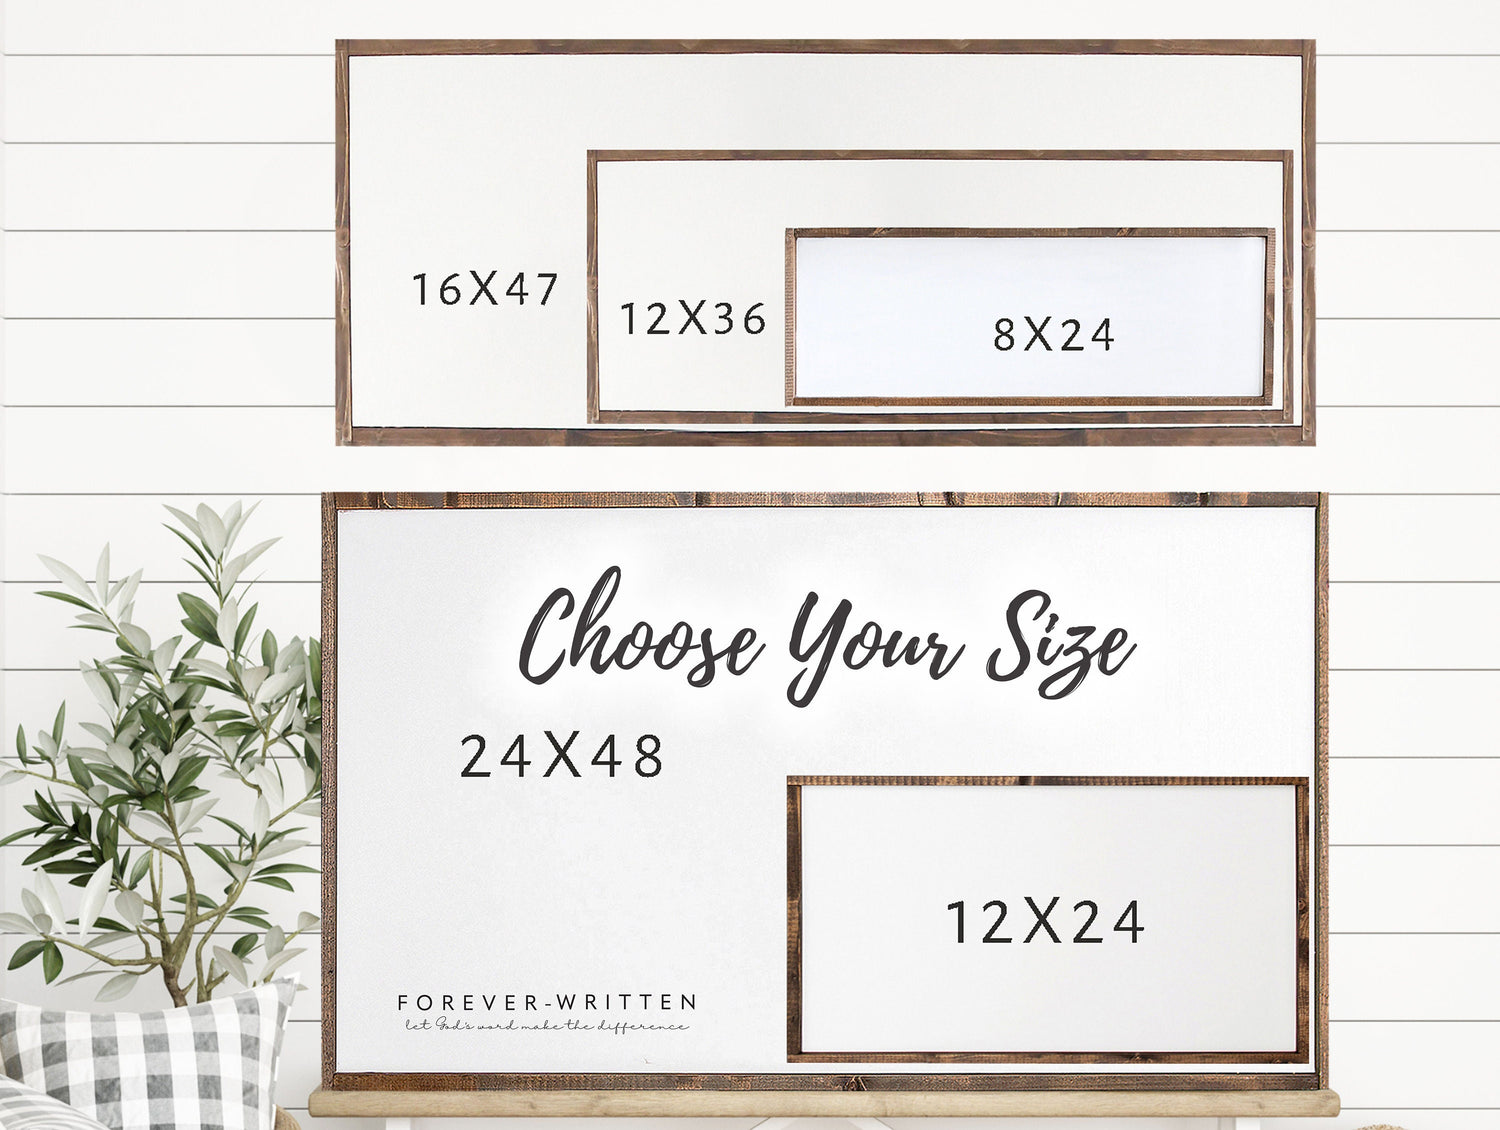 AS FOR ME and My House | Personalized Family Sign | As For Me and My House Sign | Christian Wall Art | Personalized Sign | Joshua 24:15